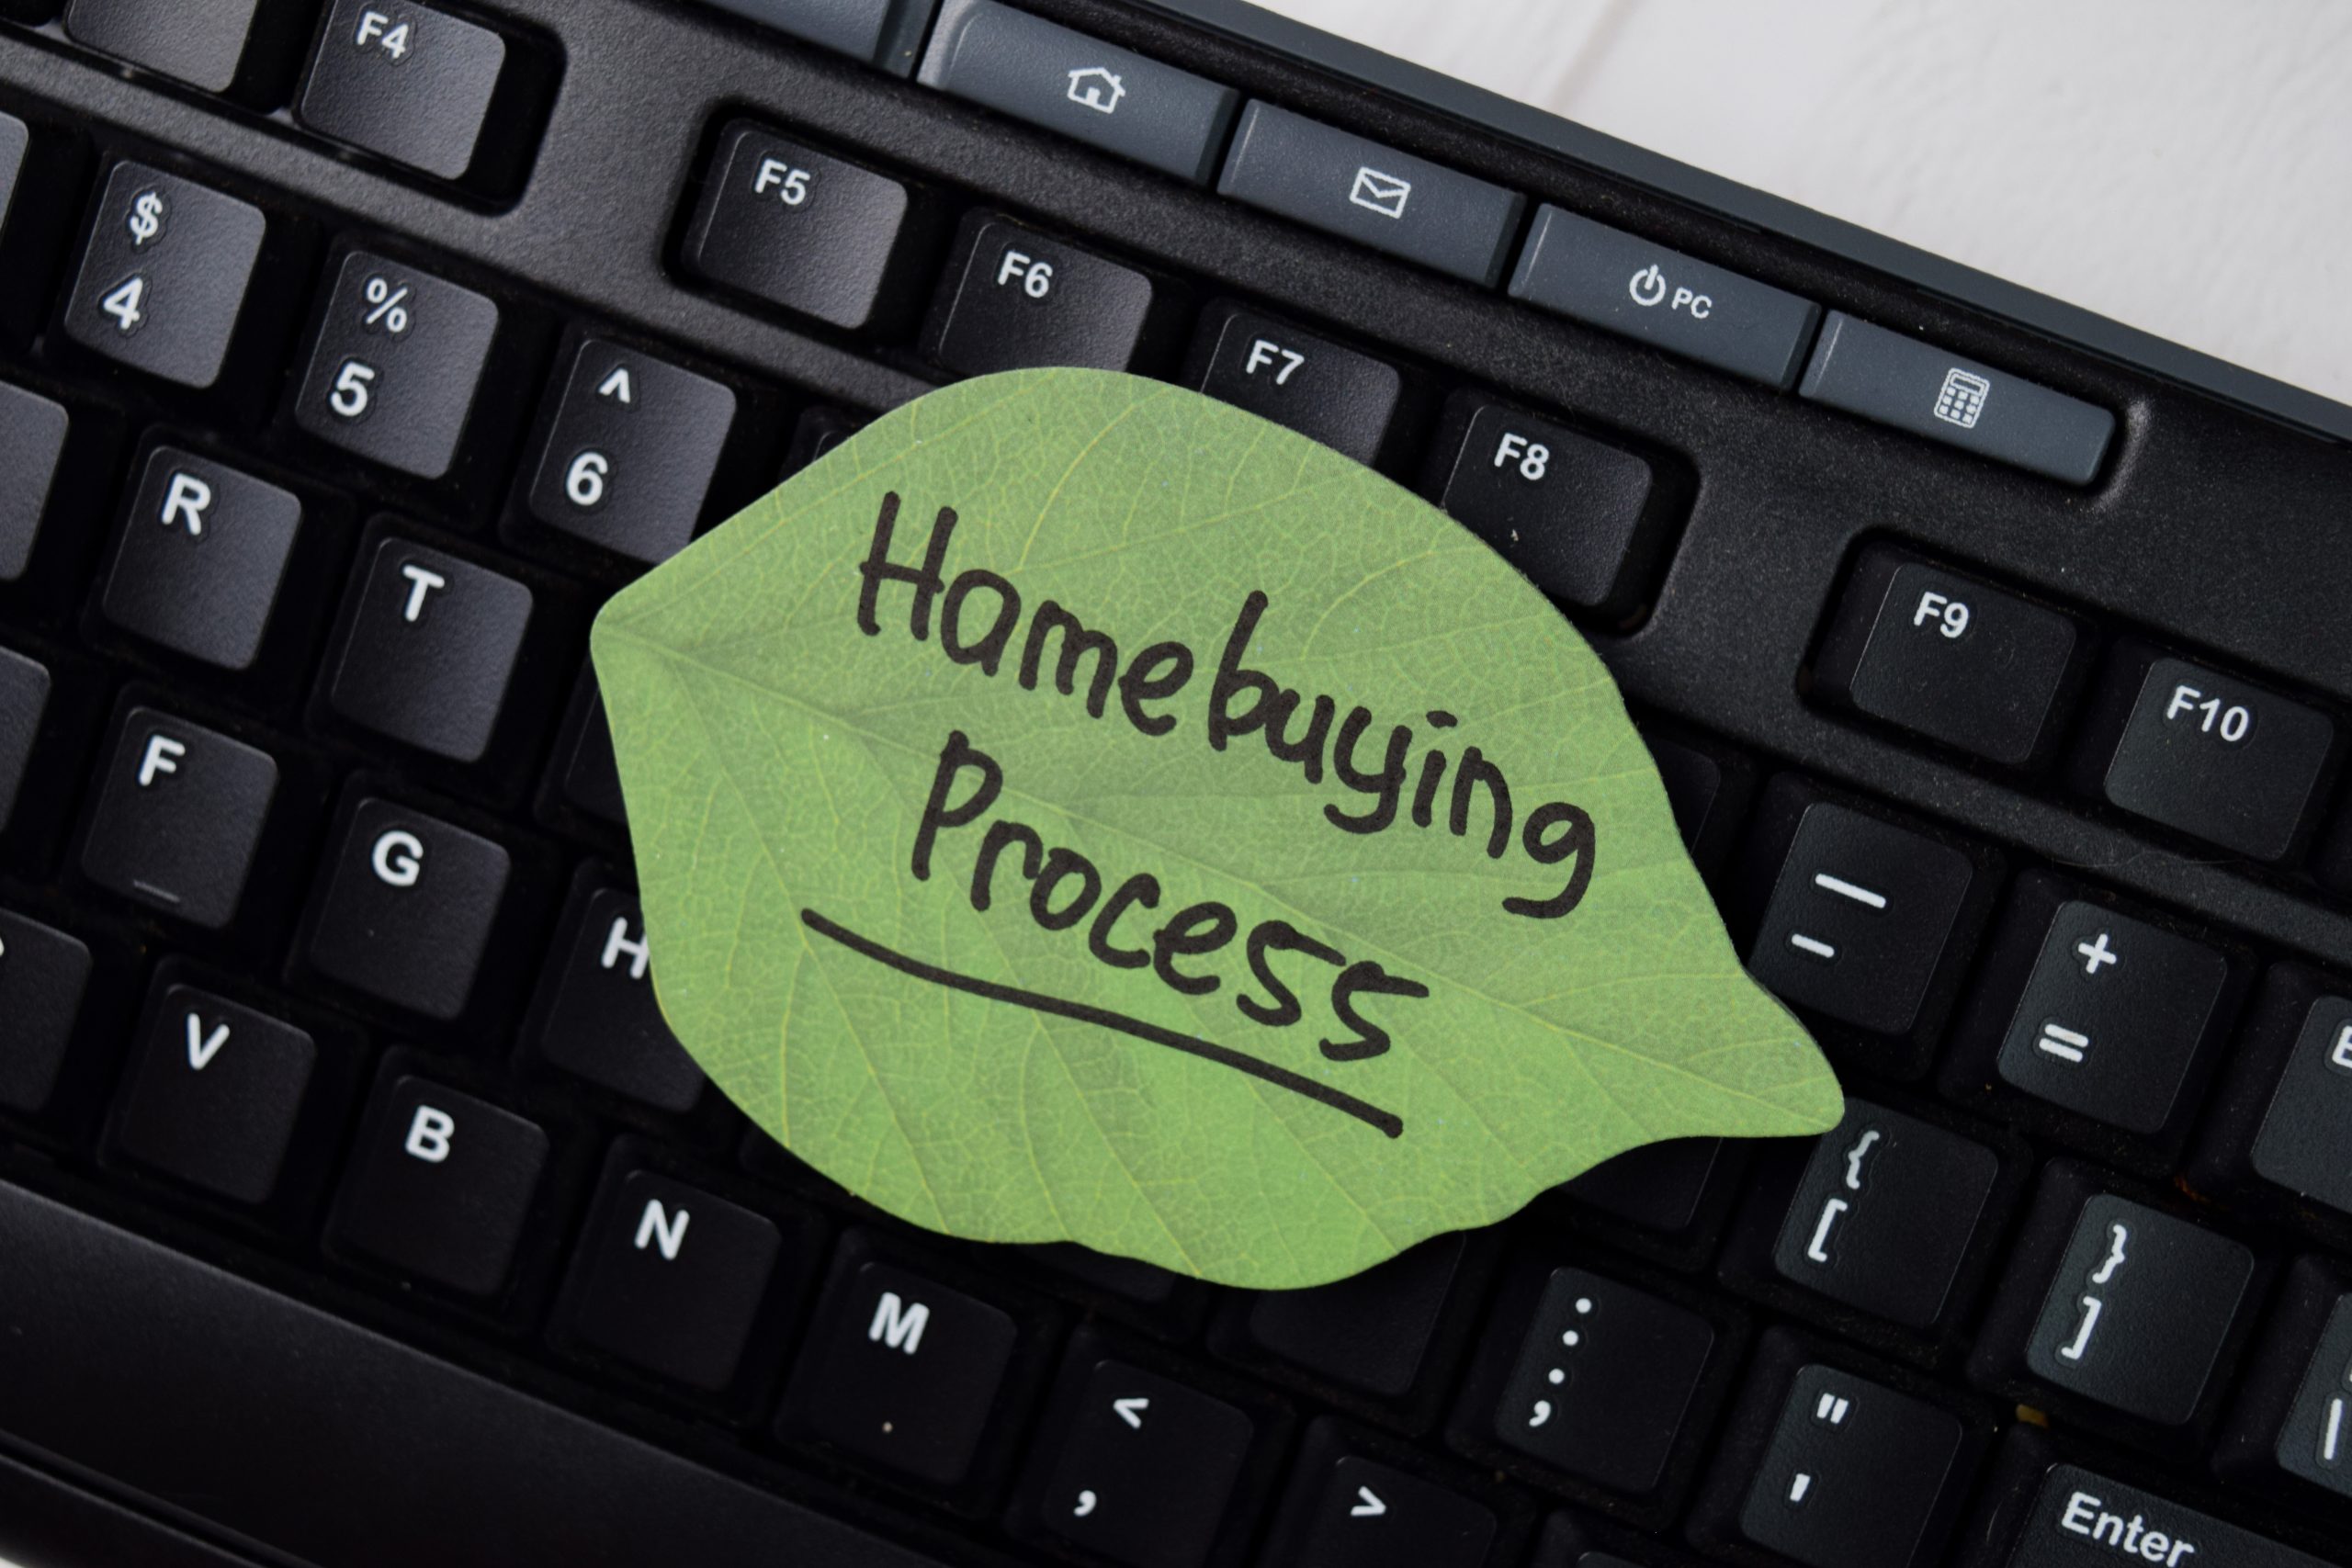 Breaking Down The Homebuying Process